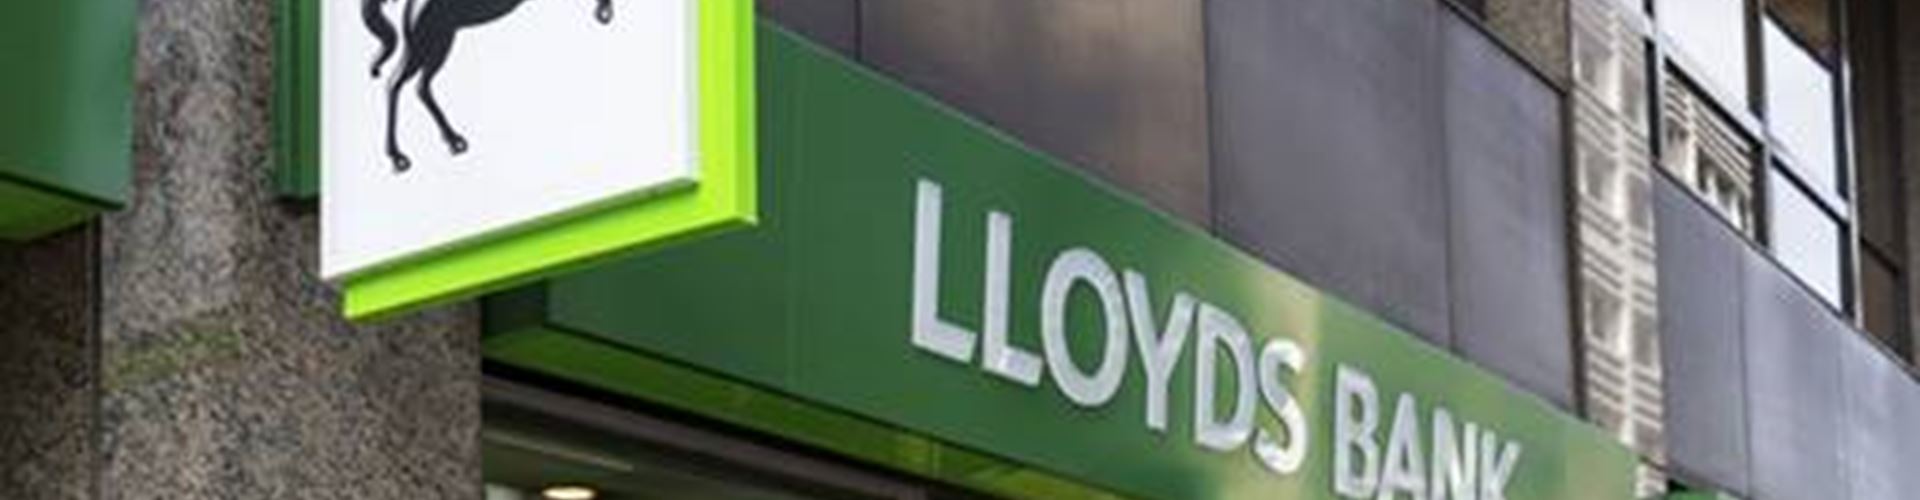 Lloyds gets closer to ‘40% women leadership by 2020’ target